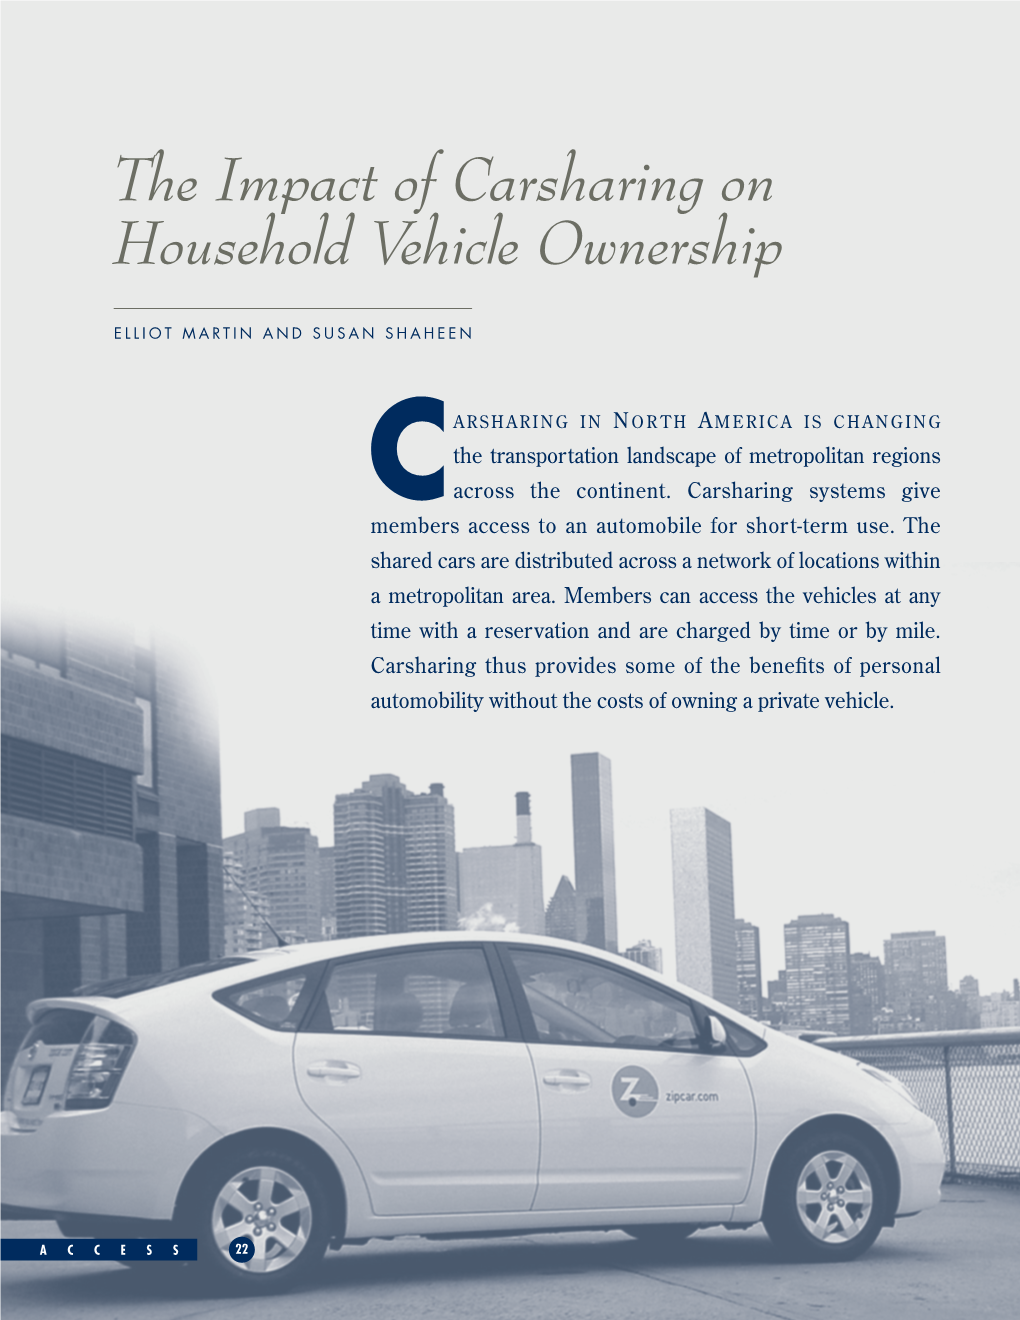 The Impact of Carsharing on Household Vehicle Ownership